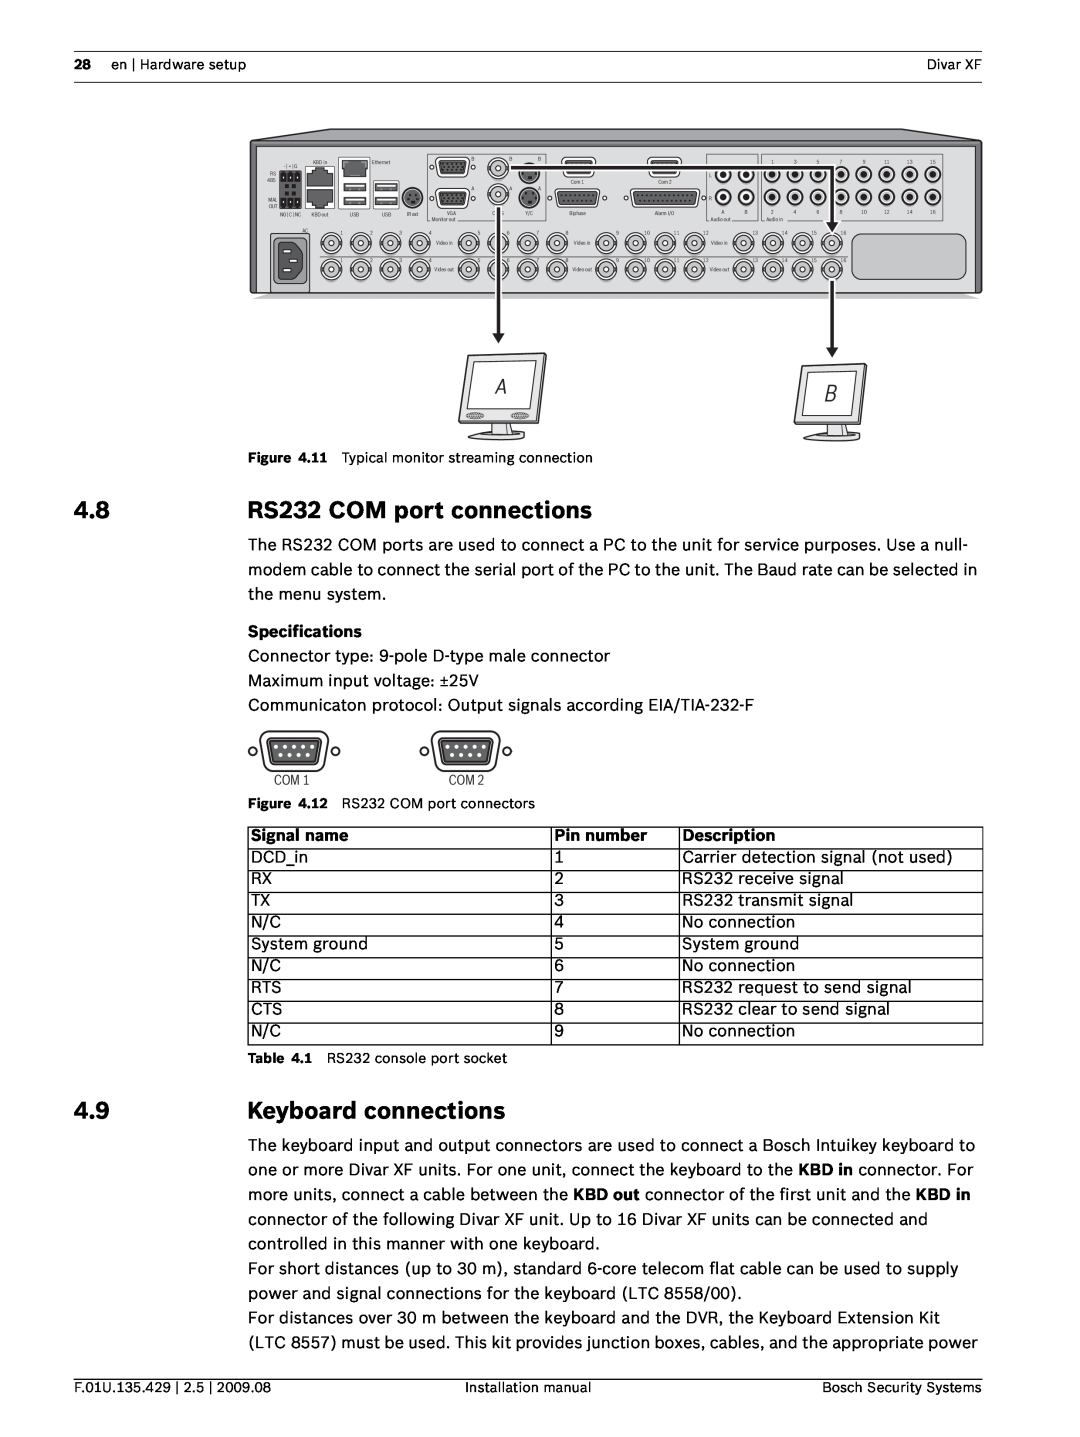 Bosch Appliances XF RS232 COM port connections, Keyboard connections, Signal name, Pin number, Description, Specifications 